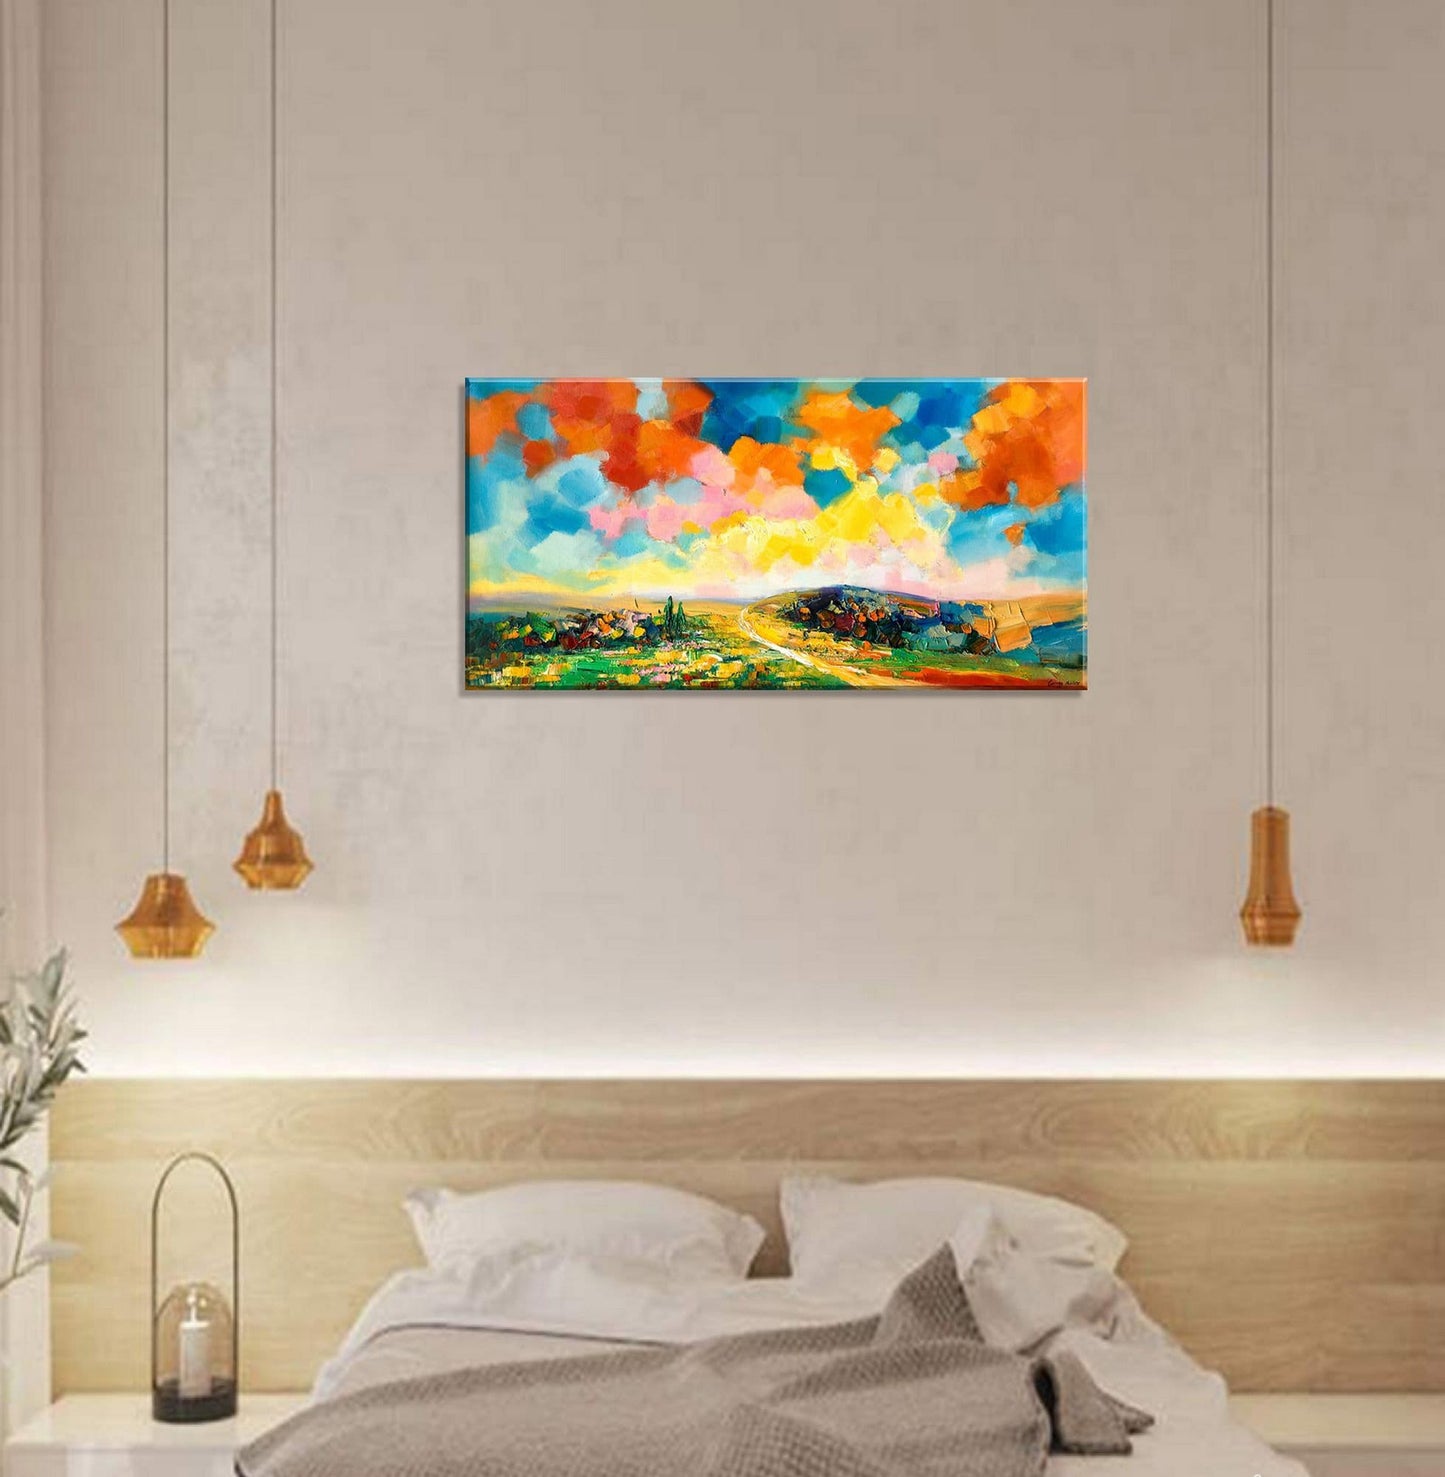 Abstract Landscape Oil Painting, Canvas Art, Paintings On Canvas, Landscape Painting, Large Canvas Art, Handmade, Contemporary, Textured Art